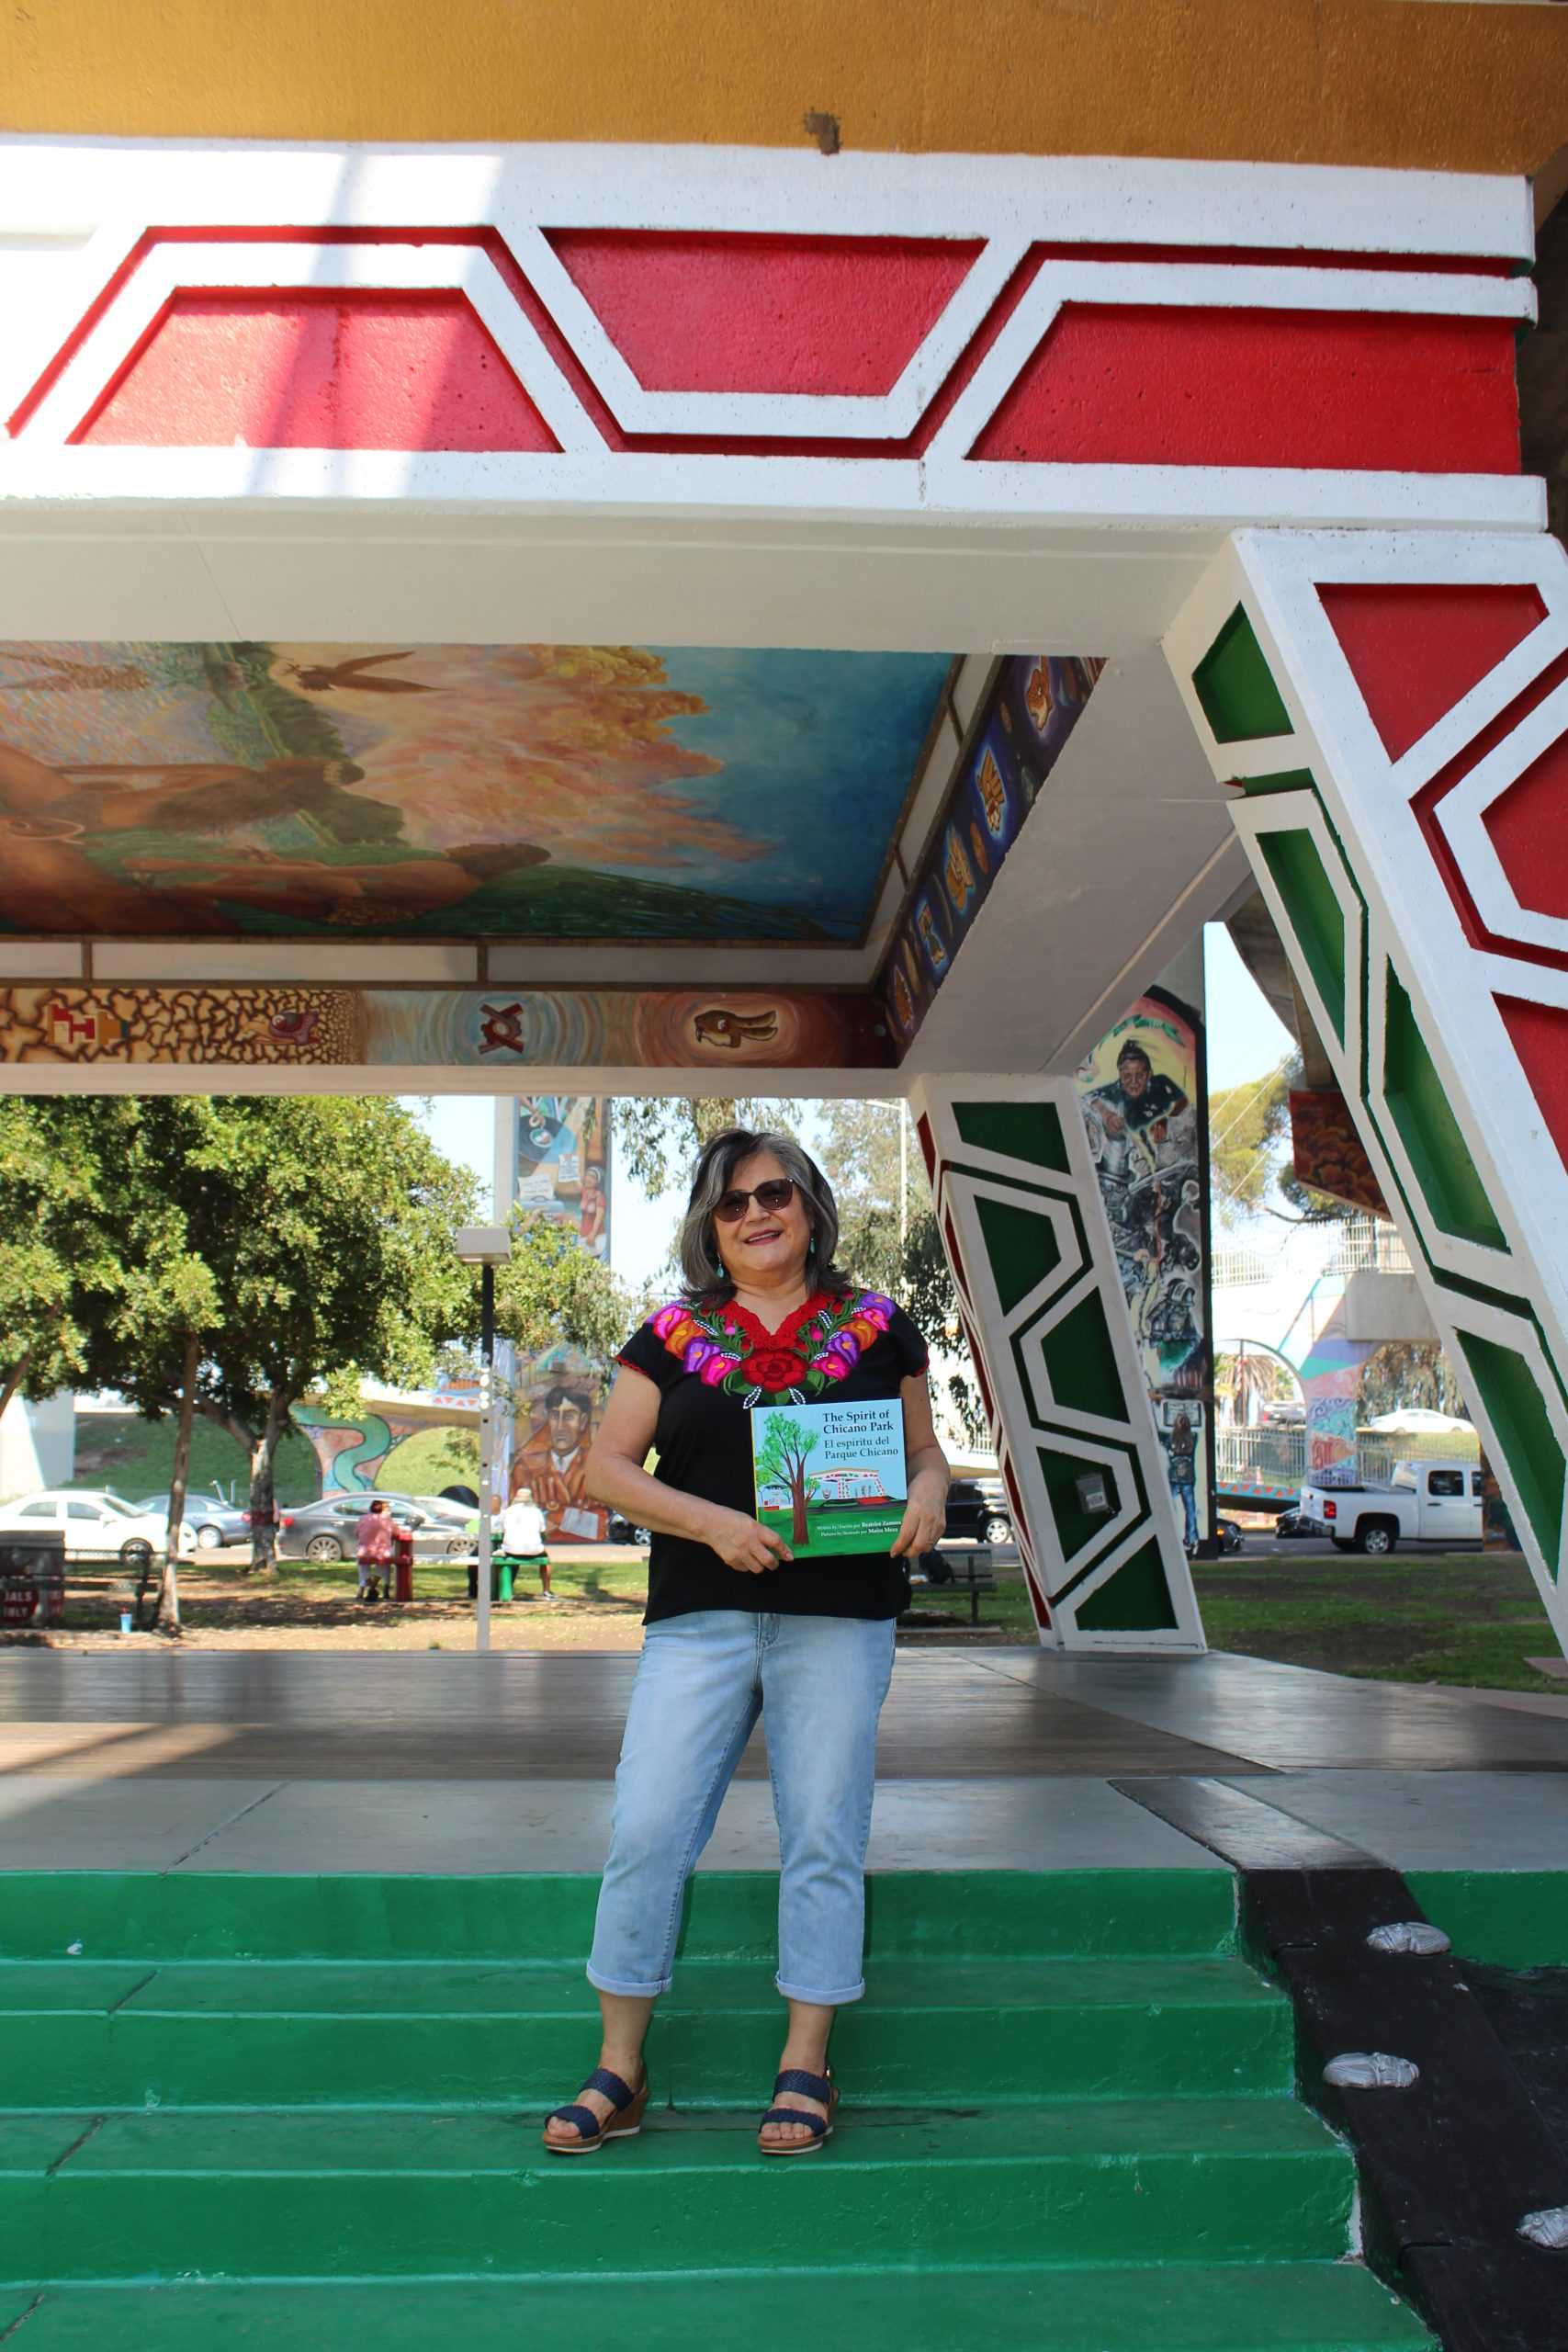 Chicano+authors+illuminate+Mexican+American+perseverance+in+award-winning+books